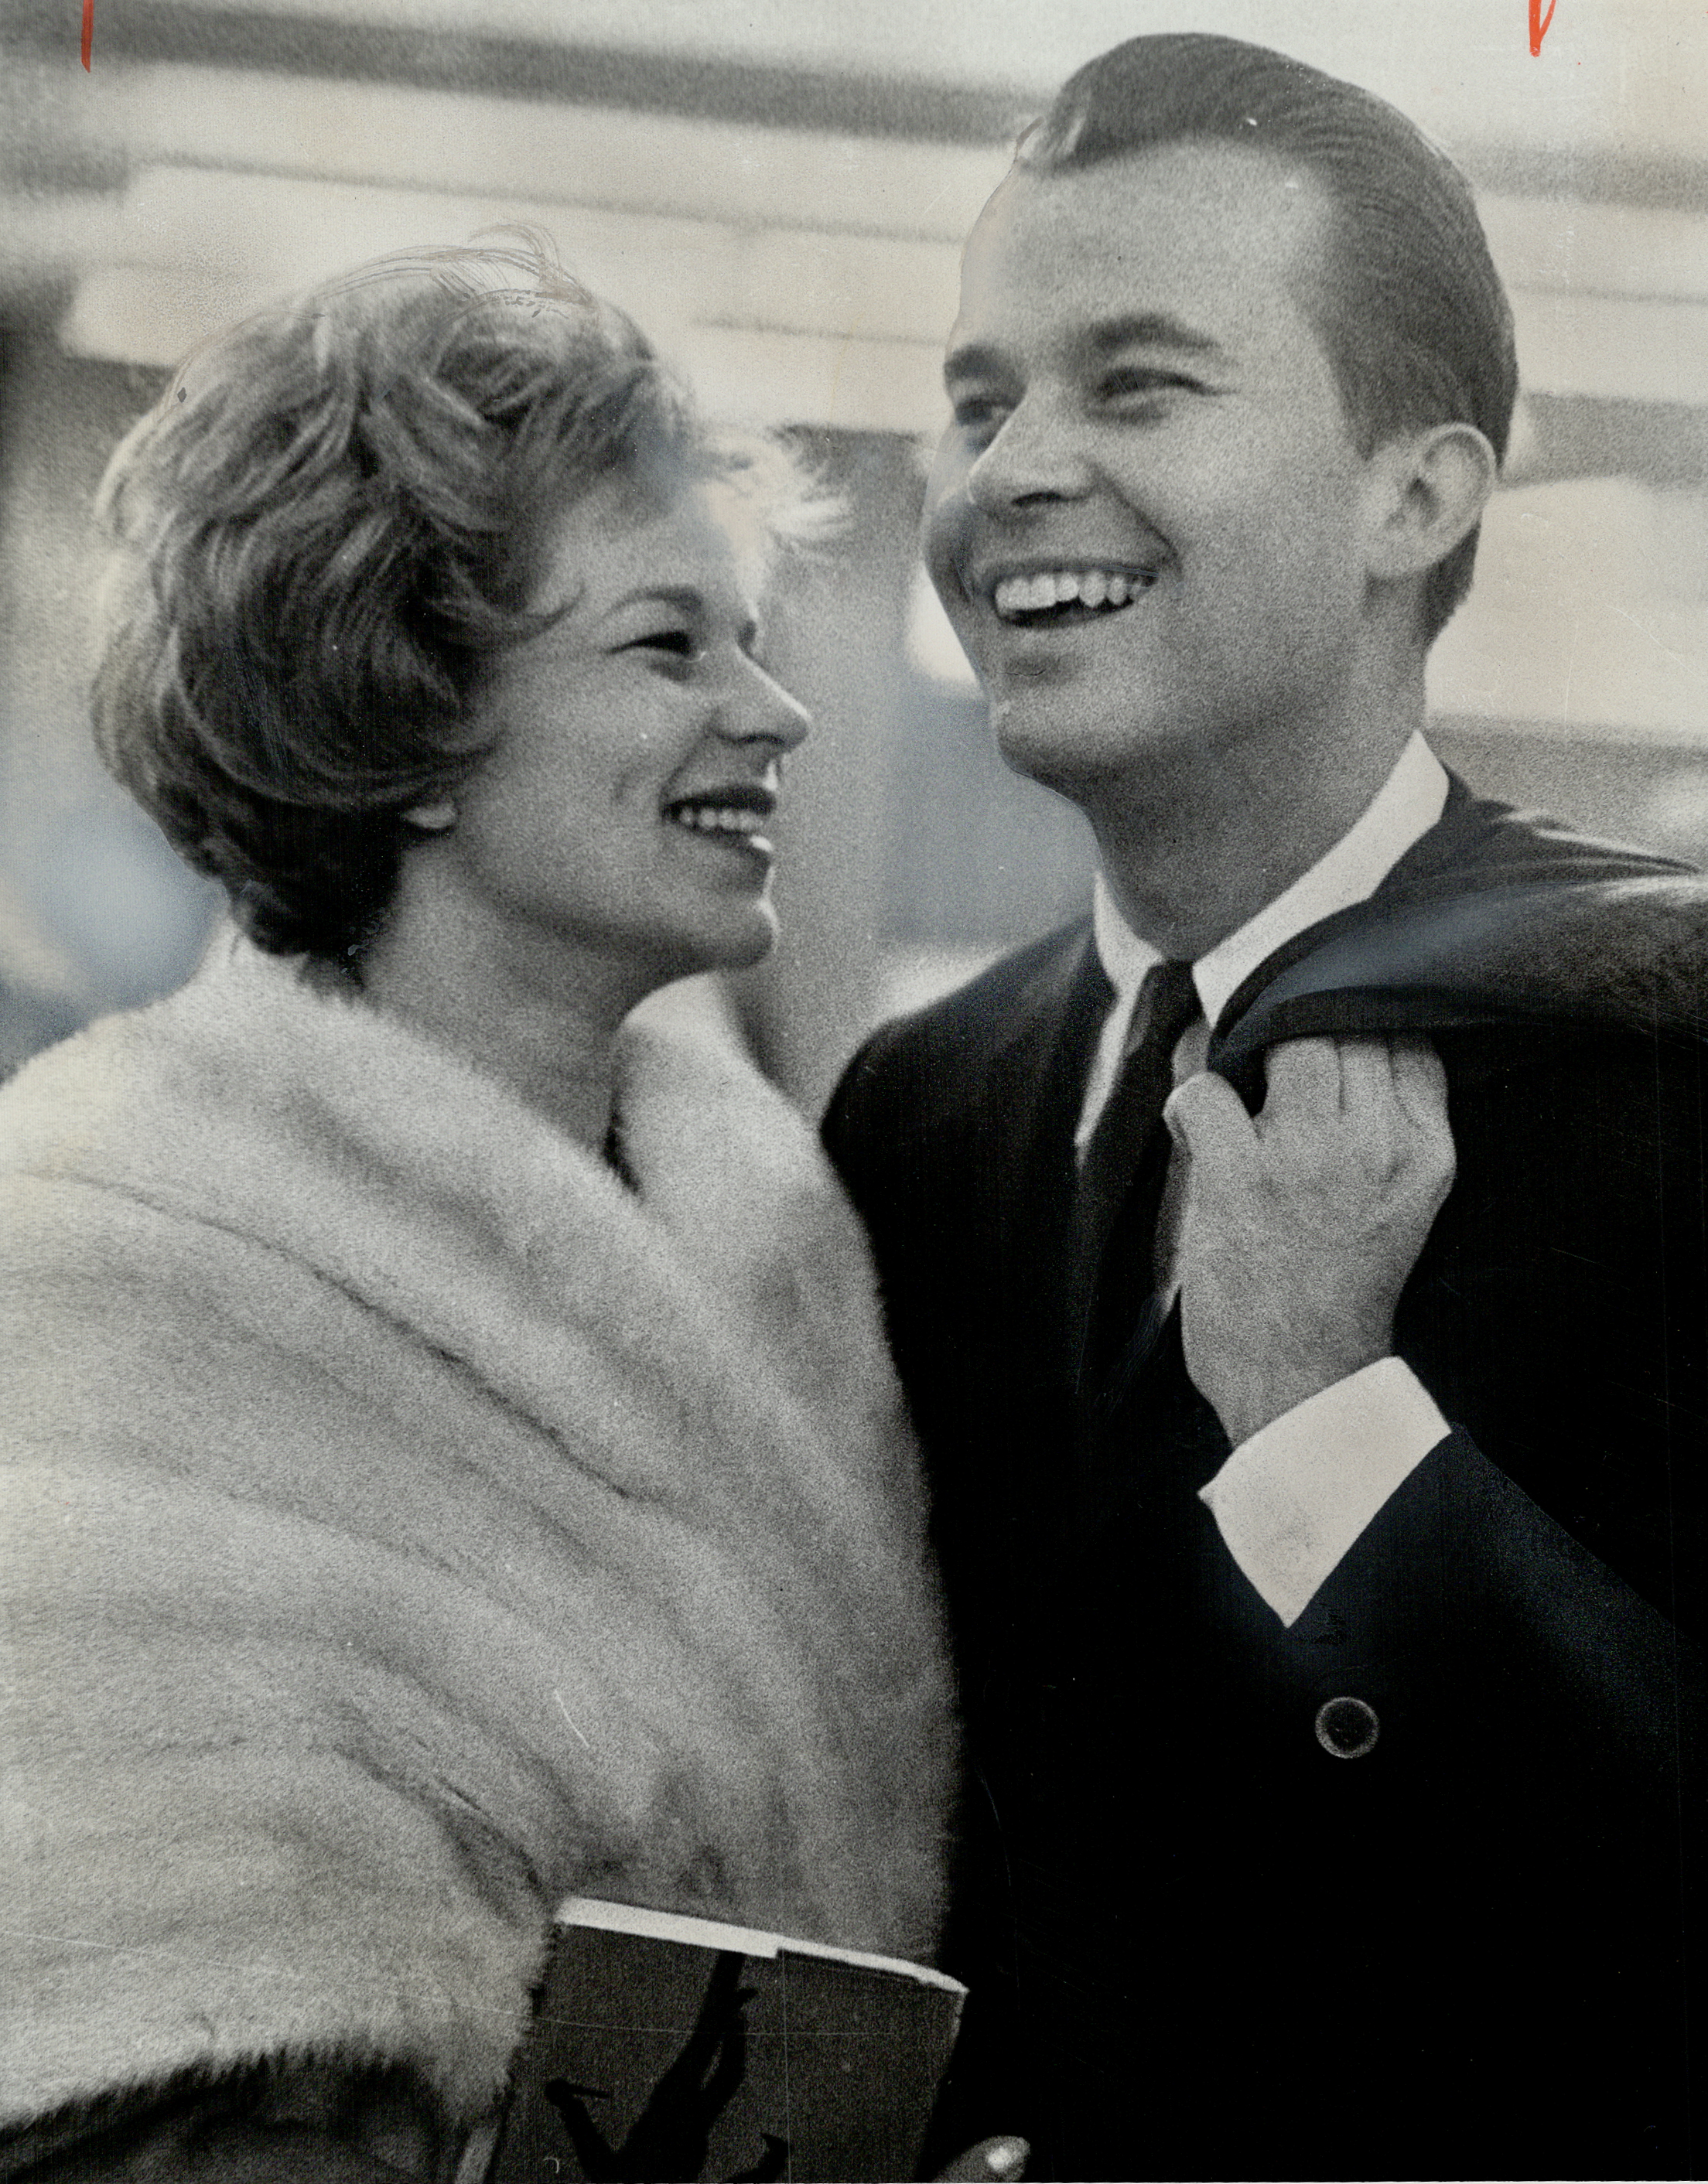 Dick Clark and Loretta Clark, 1963 | Source: Getty Images